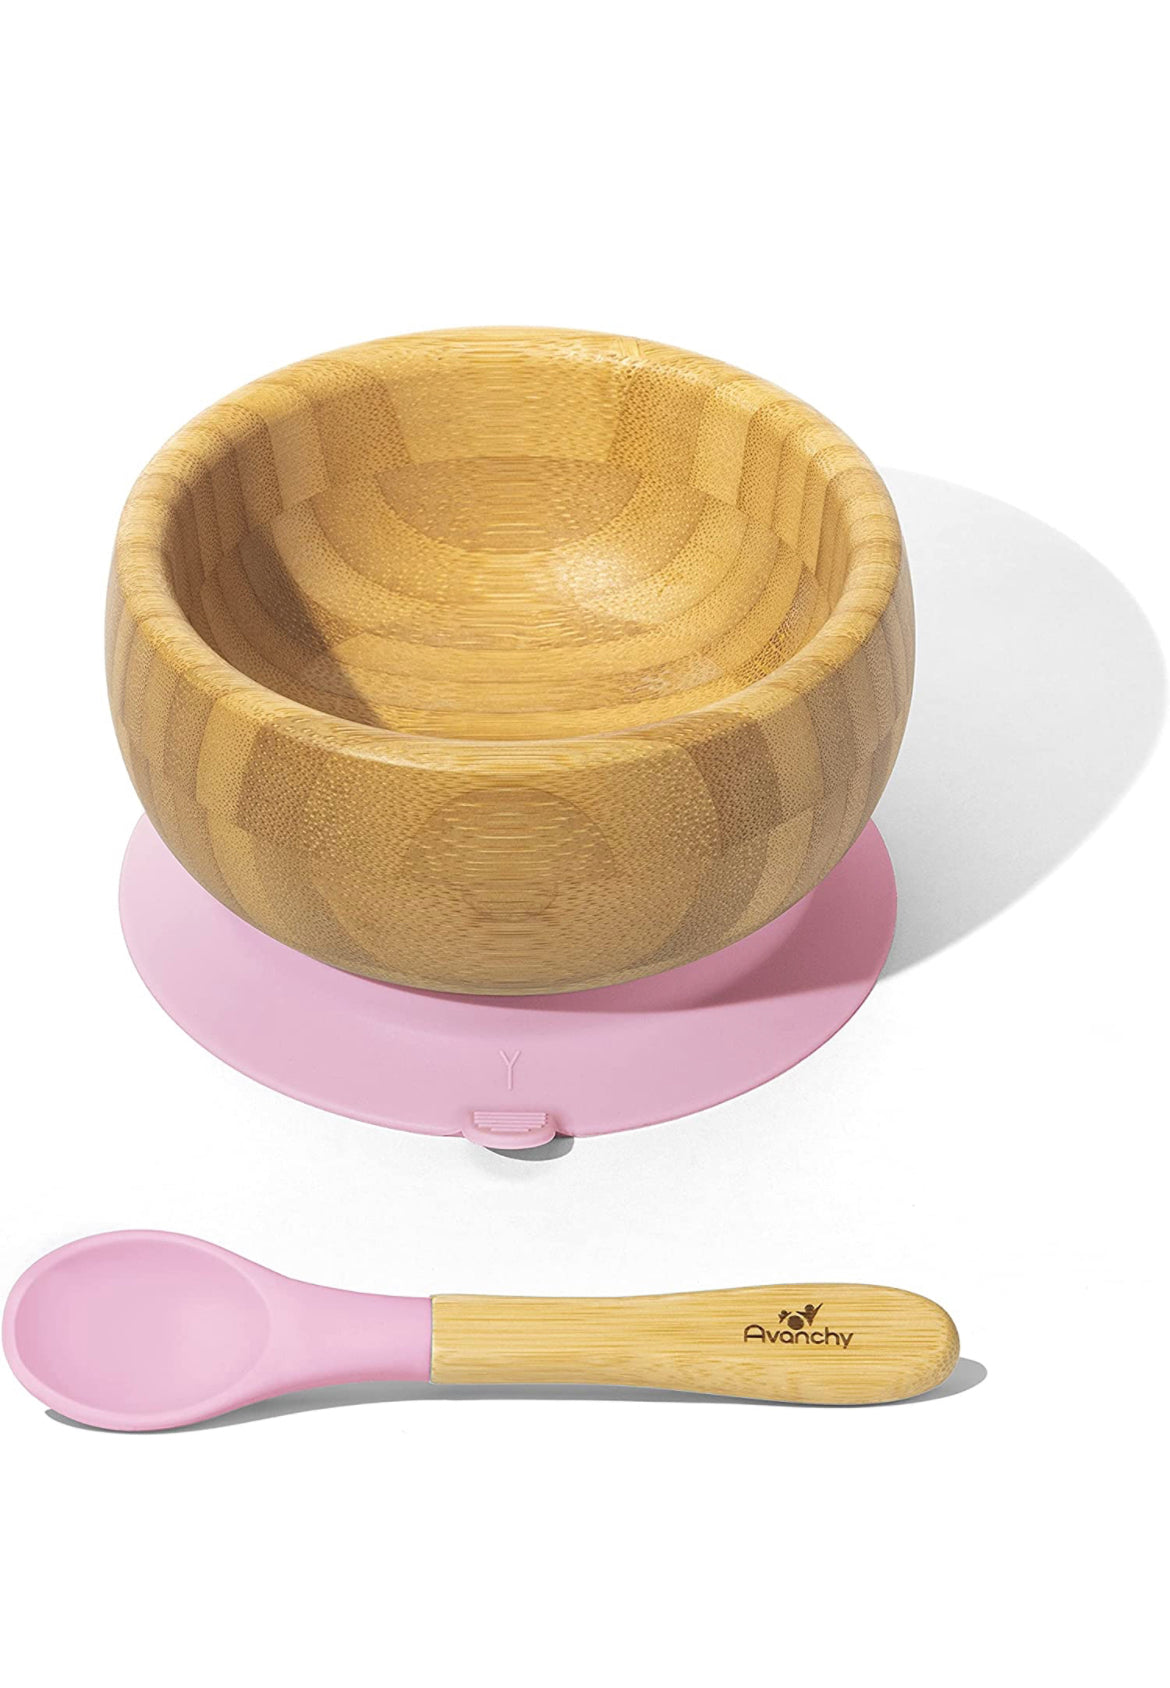 Bamboo Baby Suction Bowl and Spoon by Avanchy - Pink.